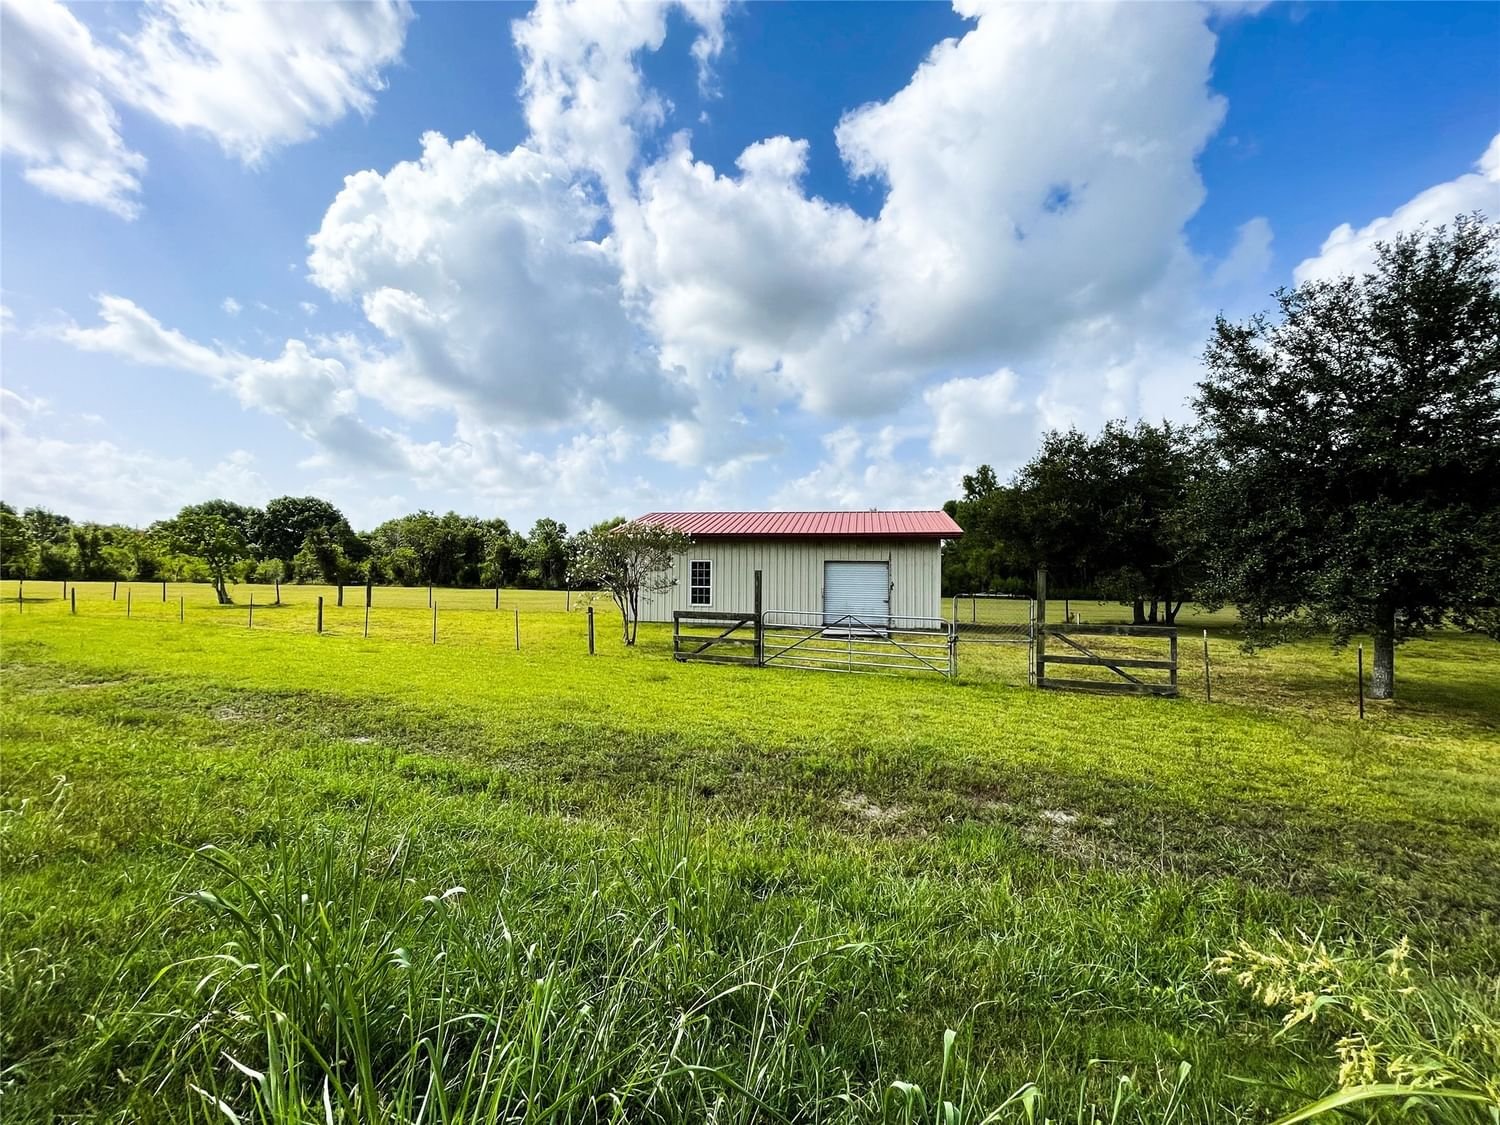 Real estate property located at 1624 Hatfield  faces McHard, Brazoria, H T & B R R, Pearland, TX, US